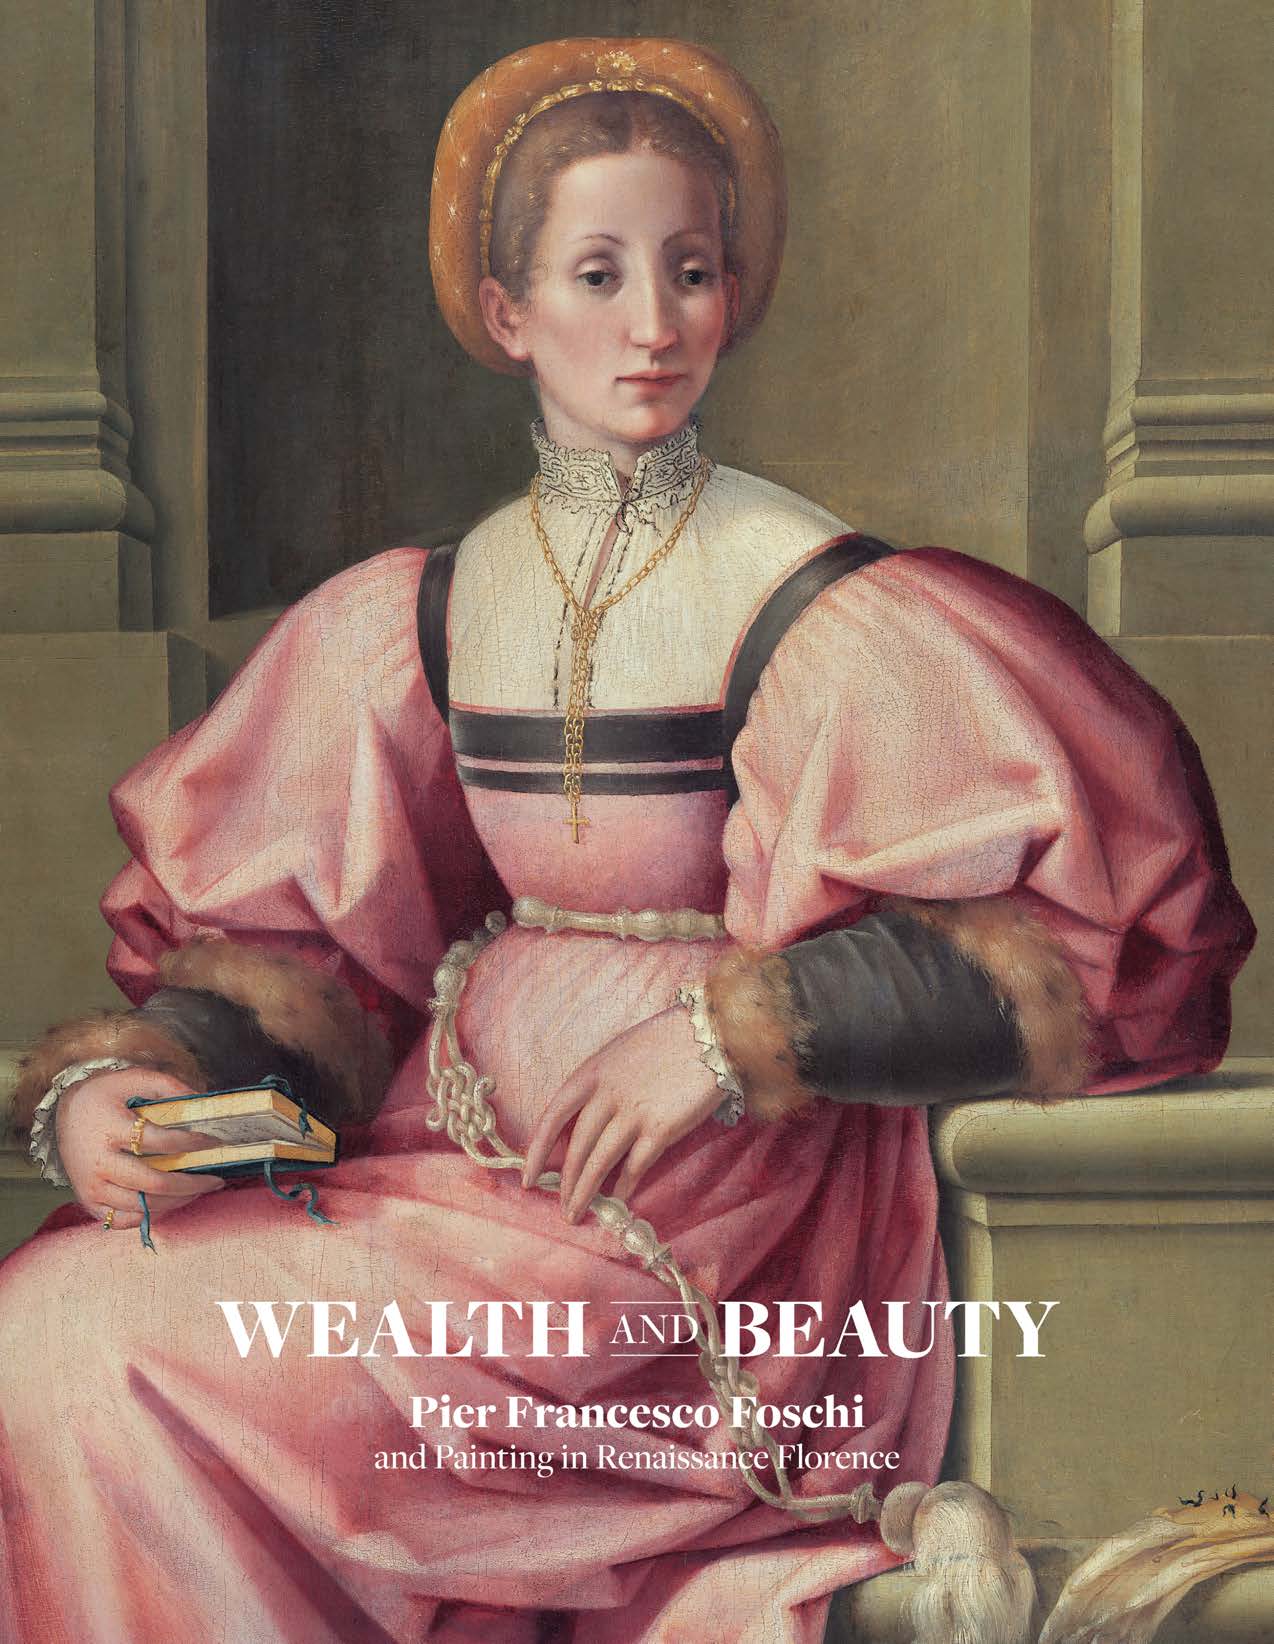 Wealth and Beauty: Pier Francesco Foschi and Painting in Renaissance Florence